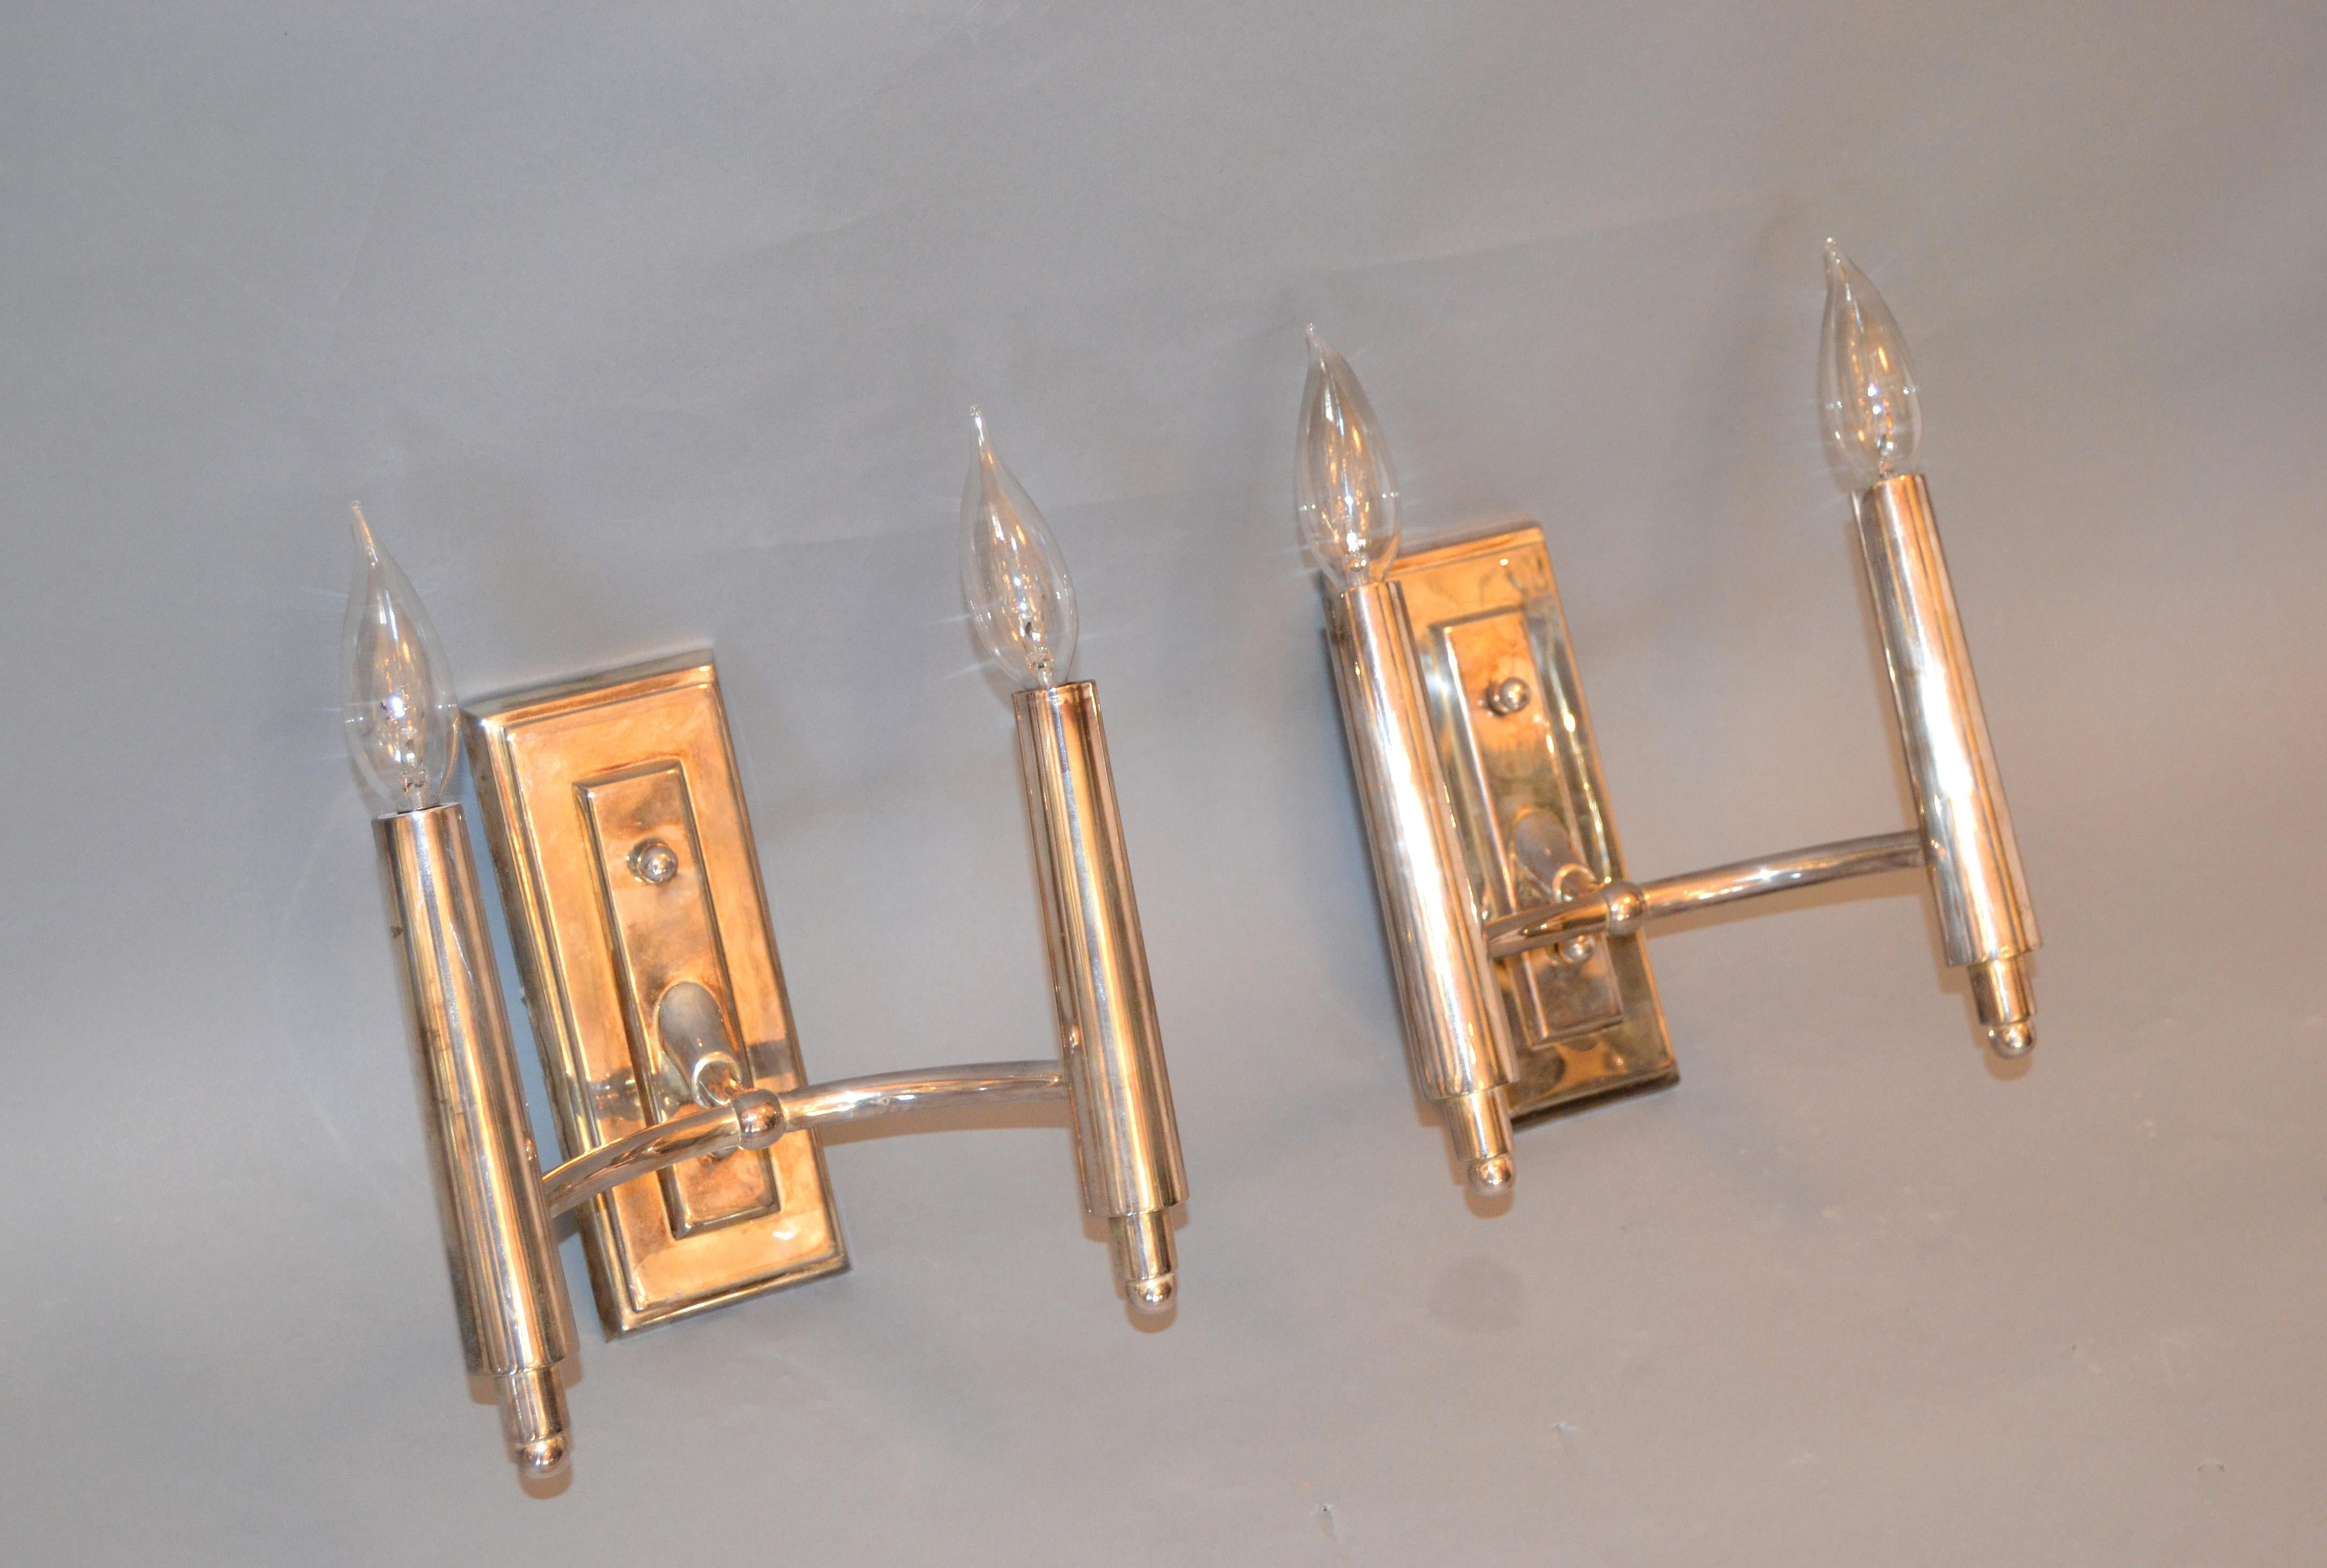 A pair of Farlane double sconces in polished silver designed by Thomas O' Brien and manufactured by Visual Comfort.
Each sconce uses 2 candelabra light bulbs with max. 40 watts.
 